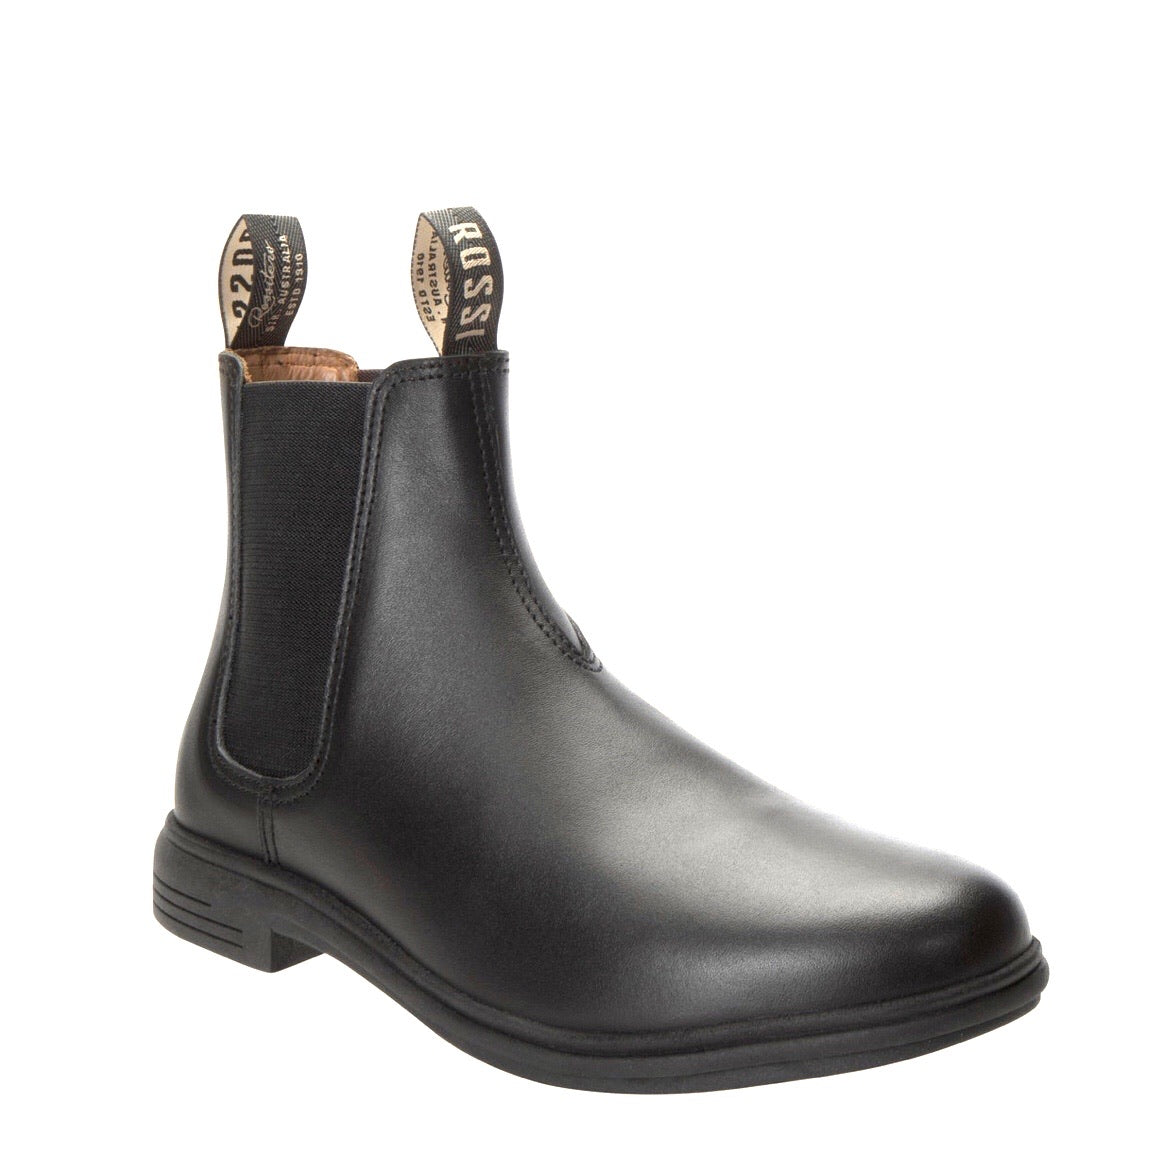 Rossi Boots 143 Barossa Black Soft Toe Leather Chelsea Dress Boot